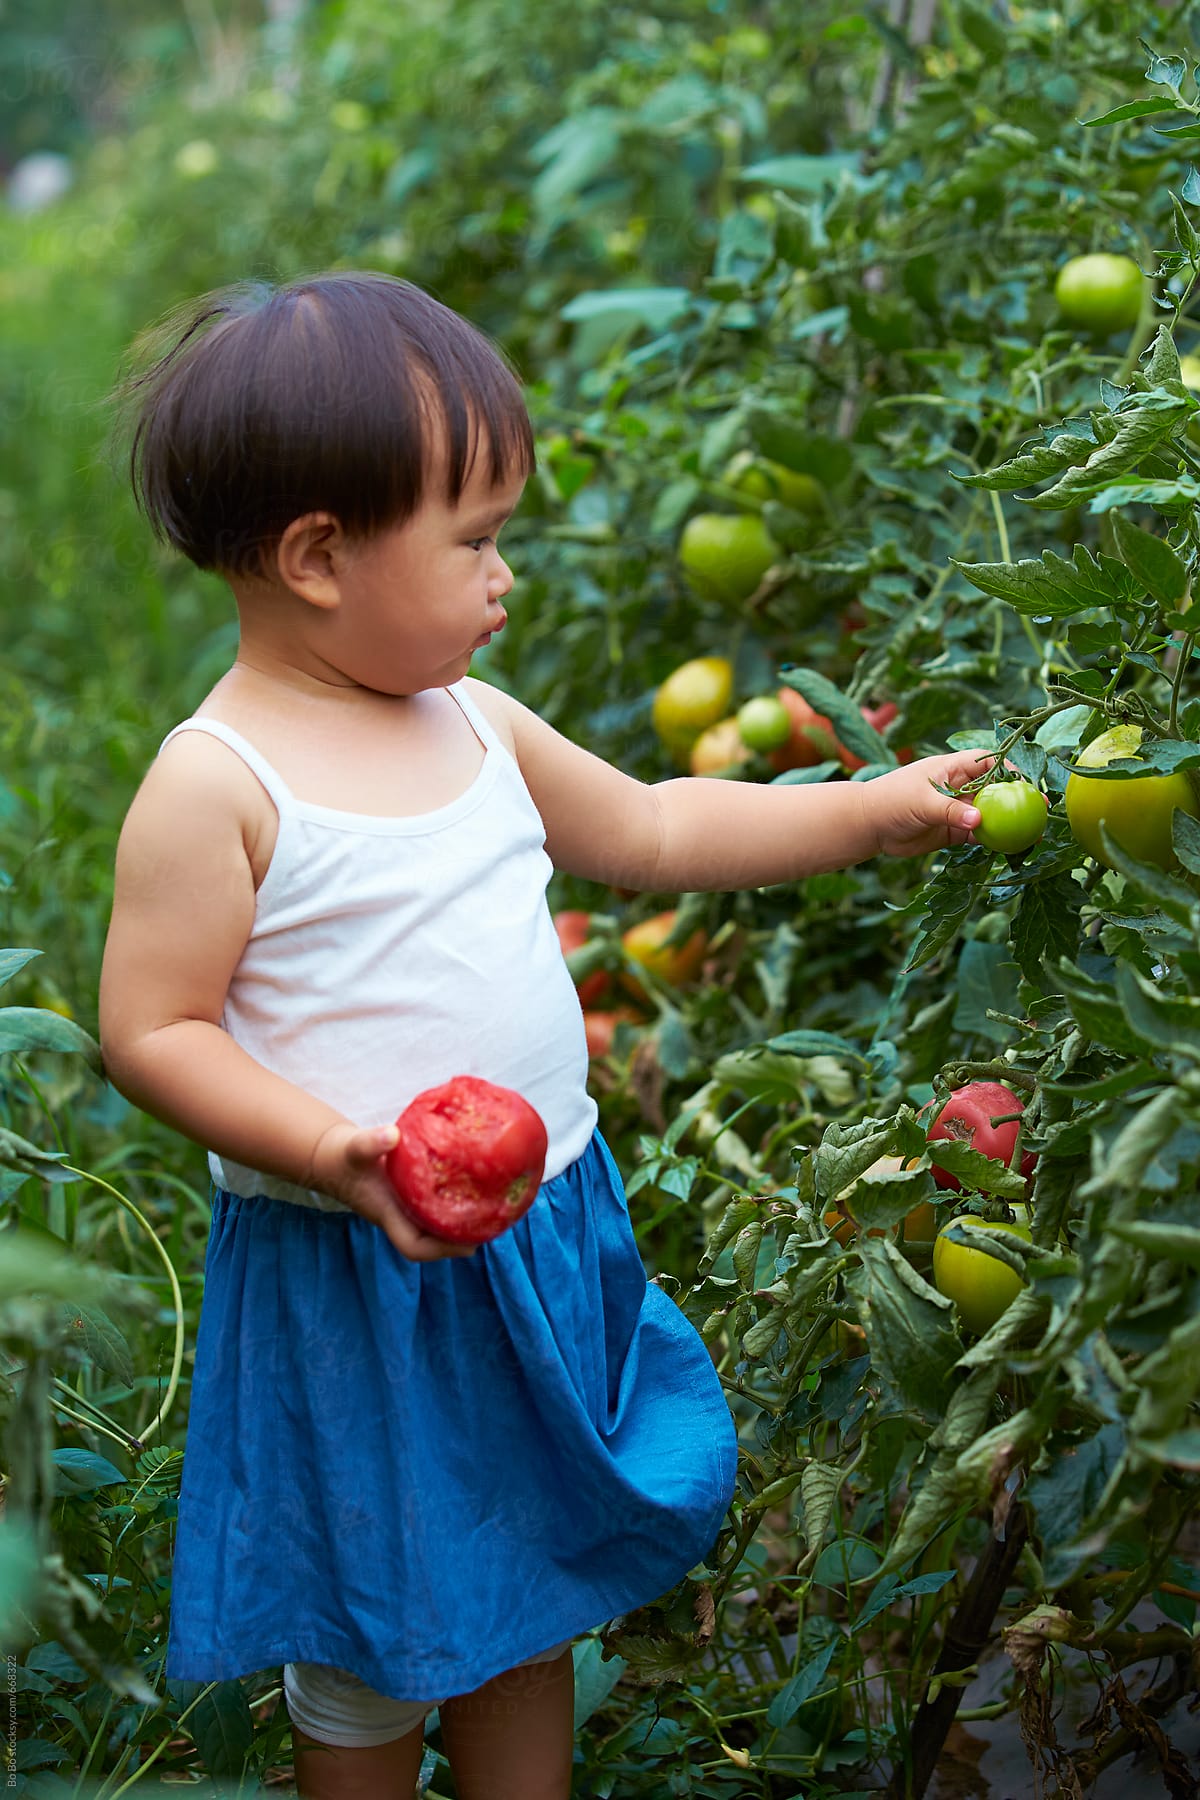 one lovely Chinese girl eating tomato in the tomato farm